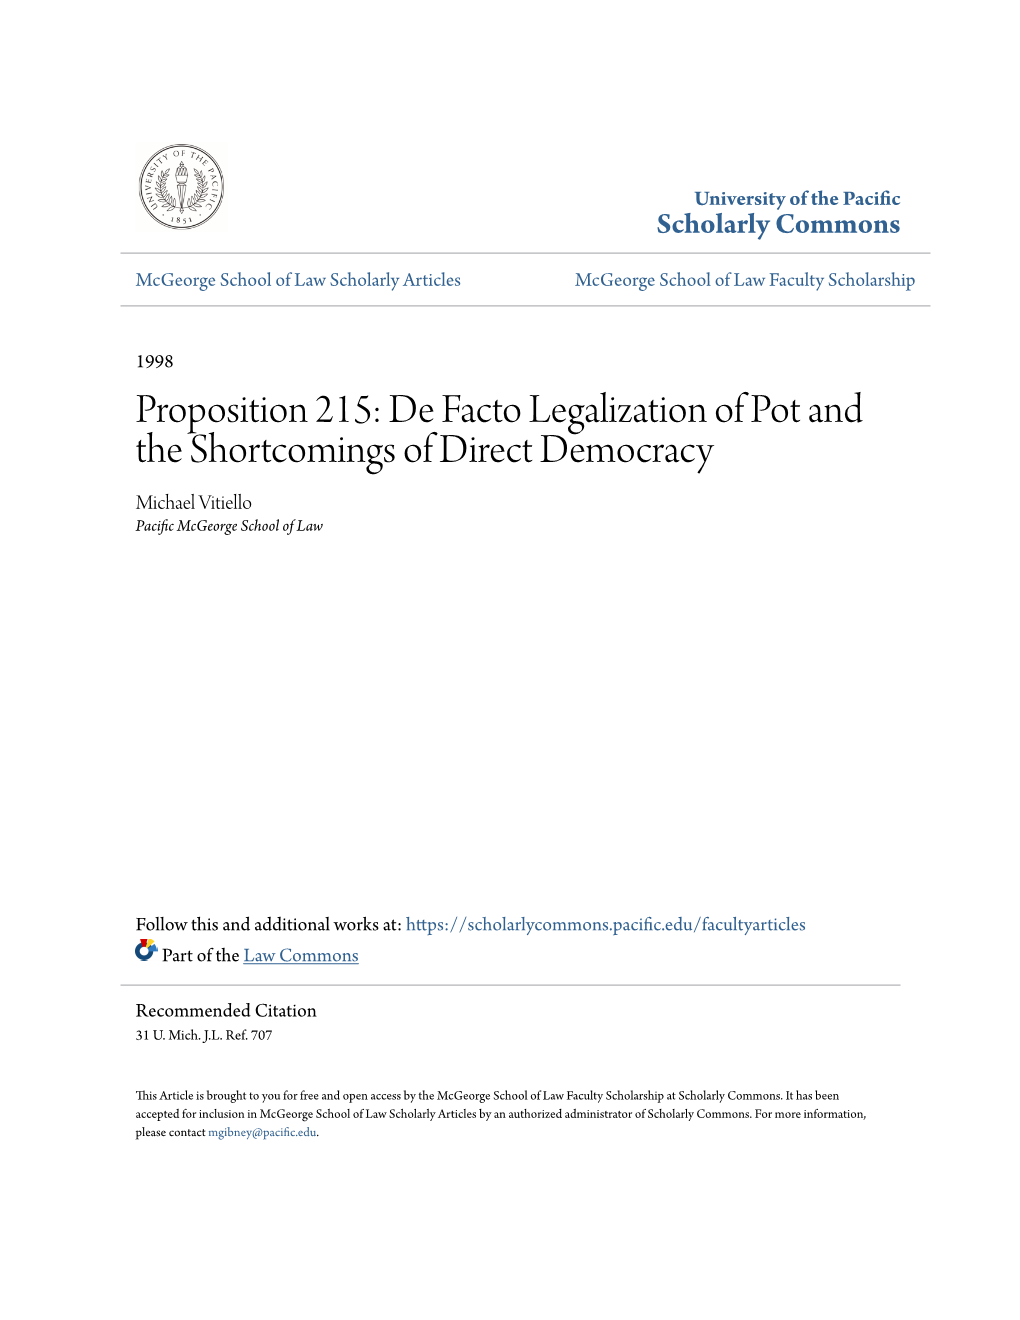 Proposition 215: De Facto Legalization of Pot and the Shortcomings of Direct Democracy Michael Vitiello Pacific Cgem Orge School of Law